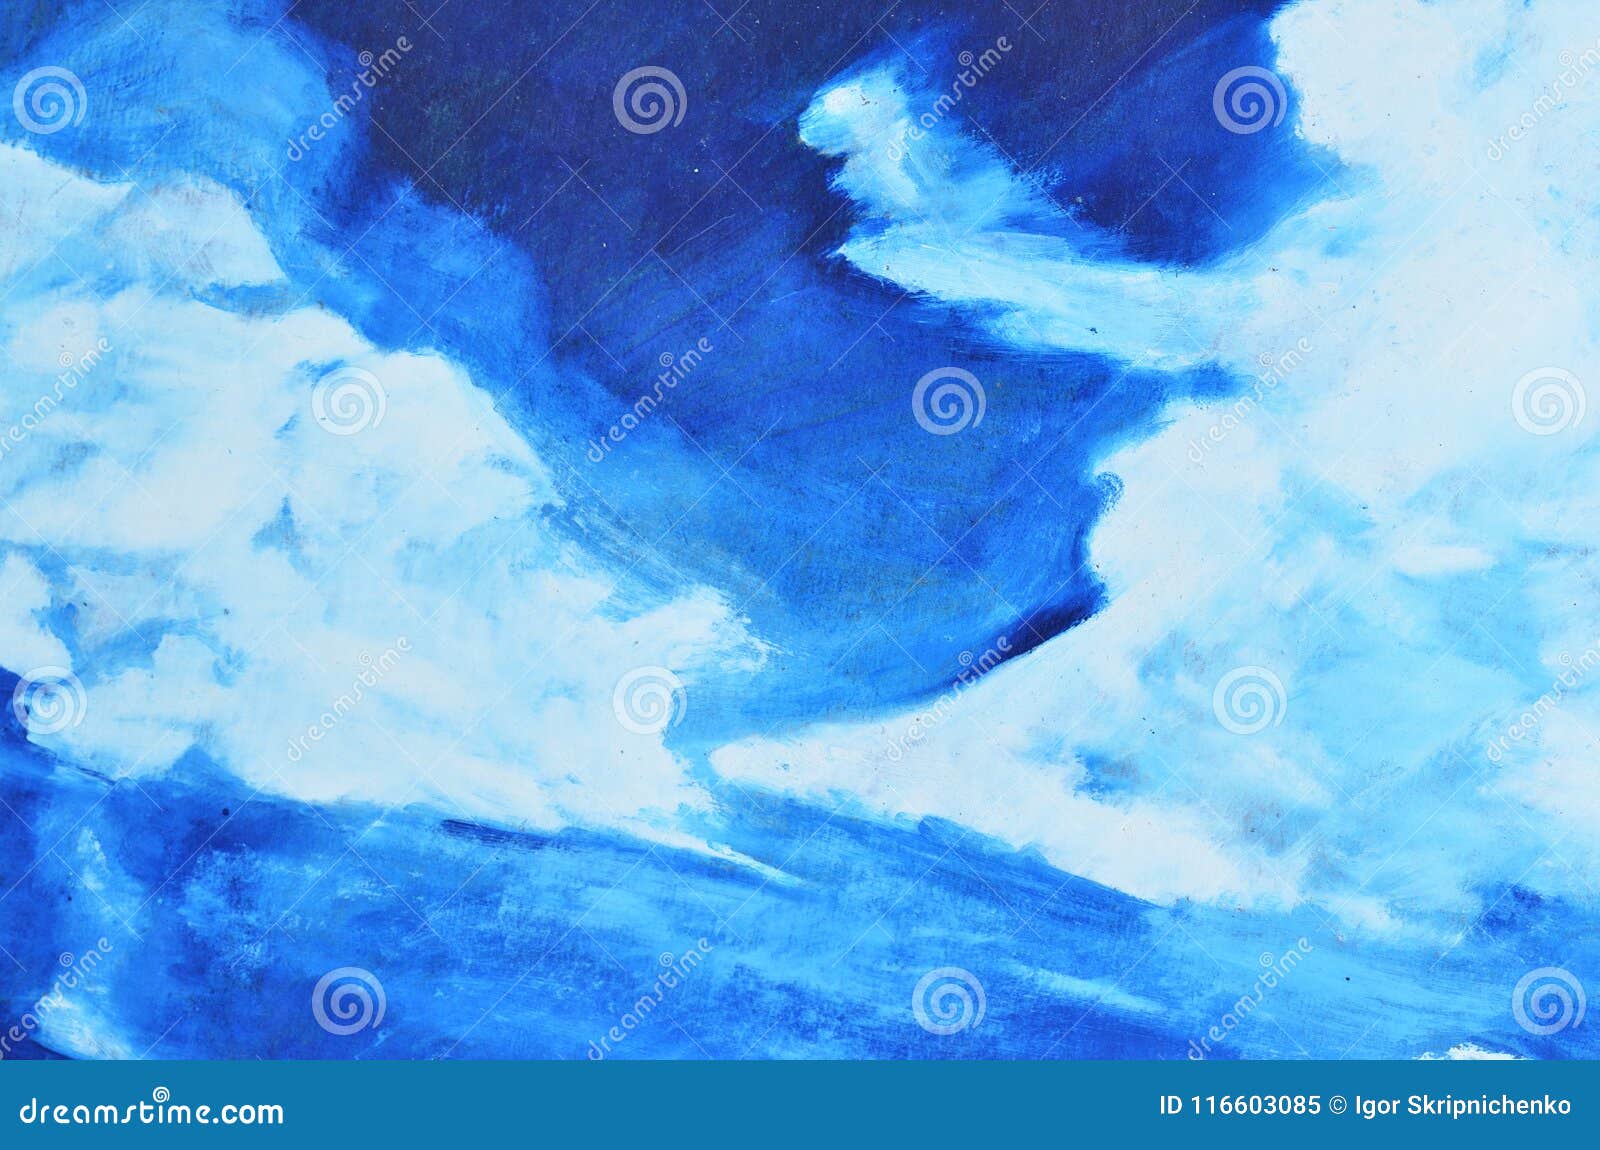 White, Blue and Dark Blue Watercolor Paint on Canvas Stock Image